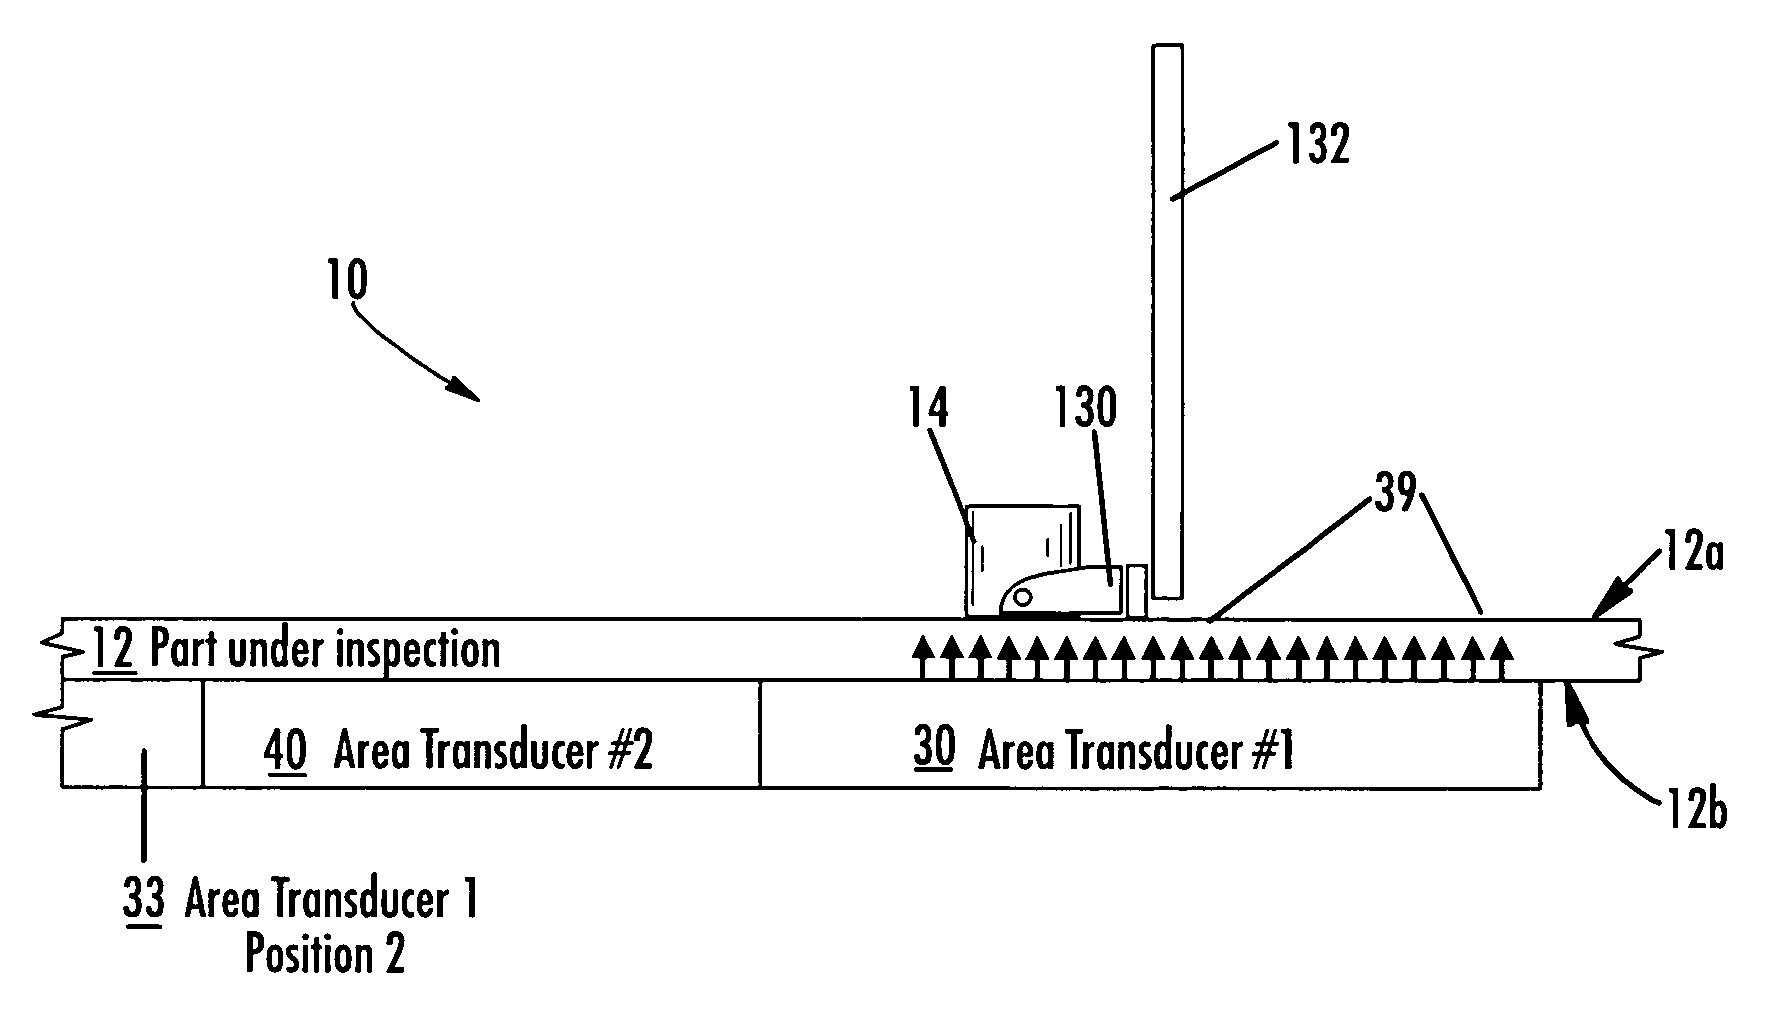 Apparatus and method for area limited-access through transmission ultrasonic inspection